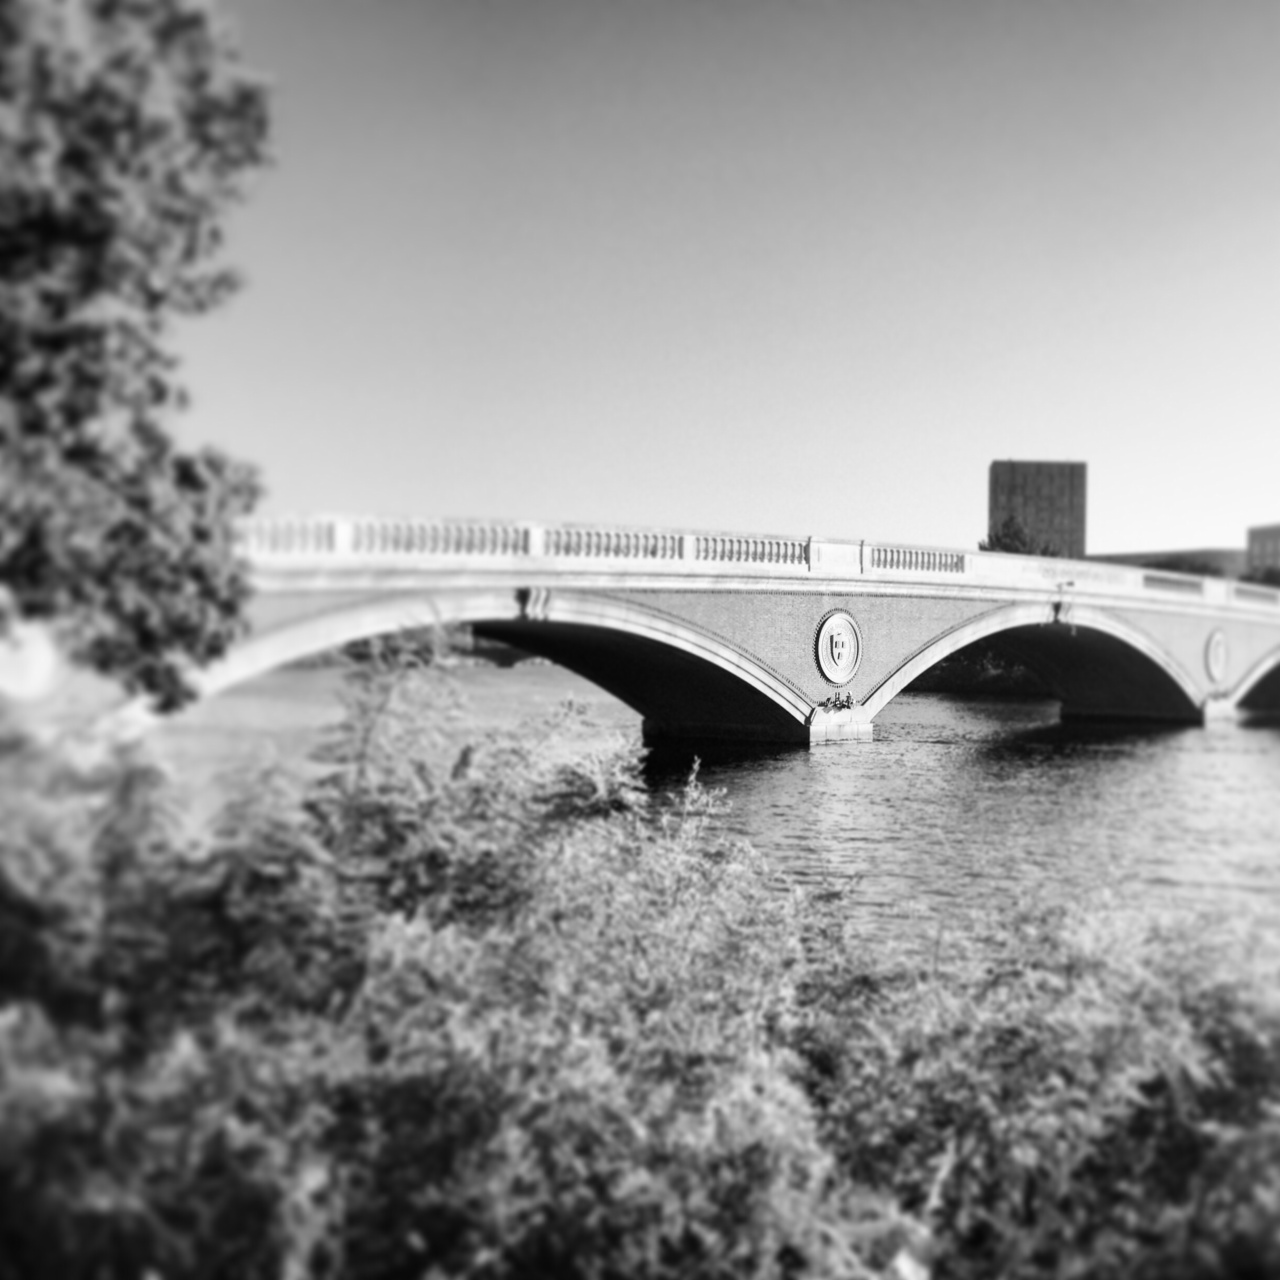 The Charles River